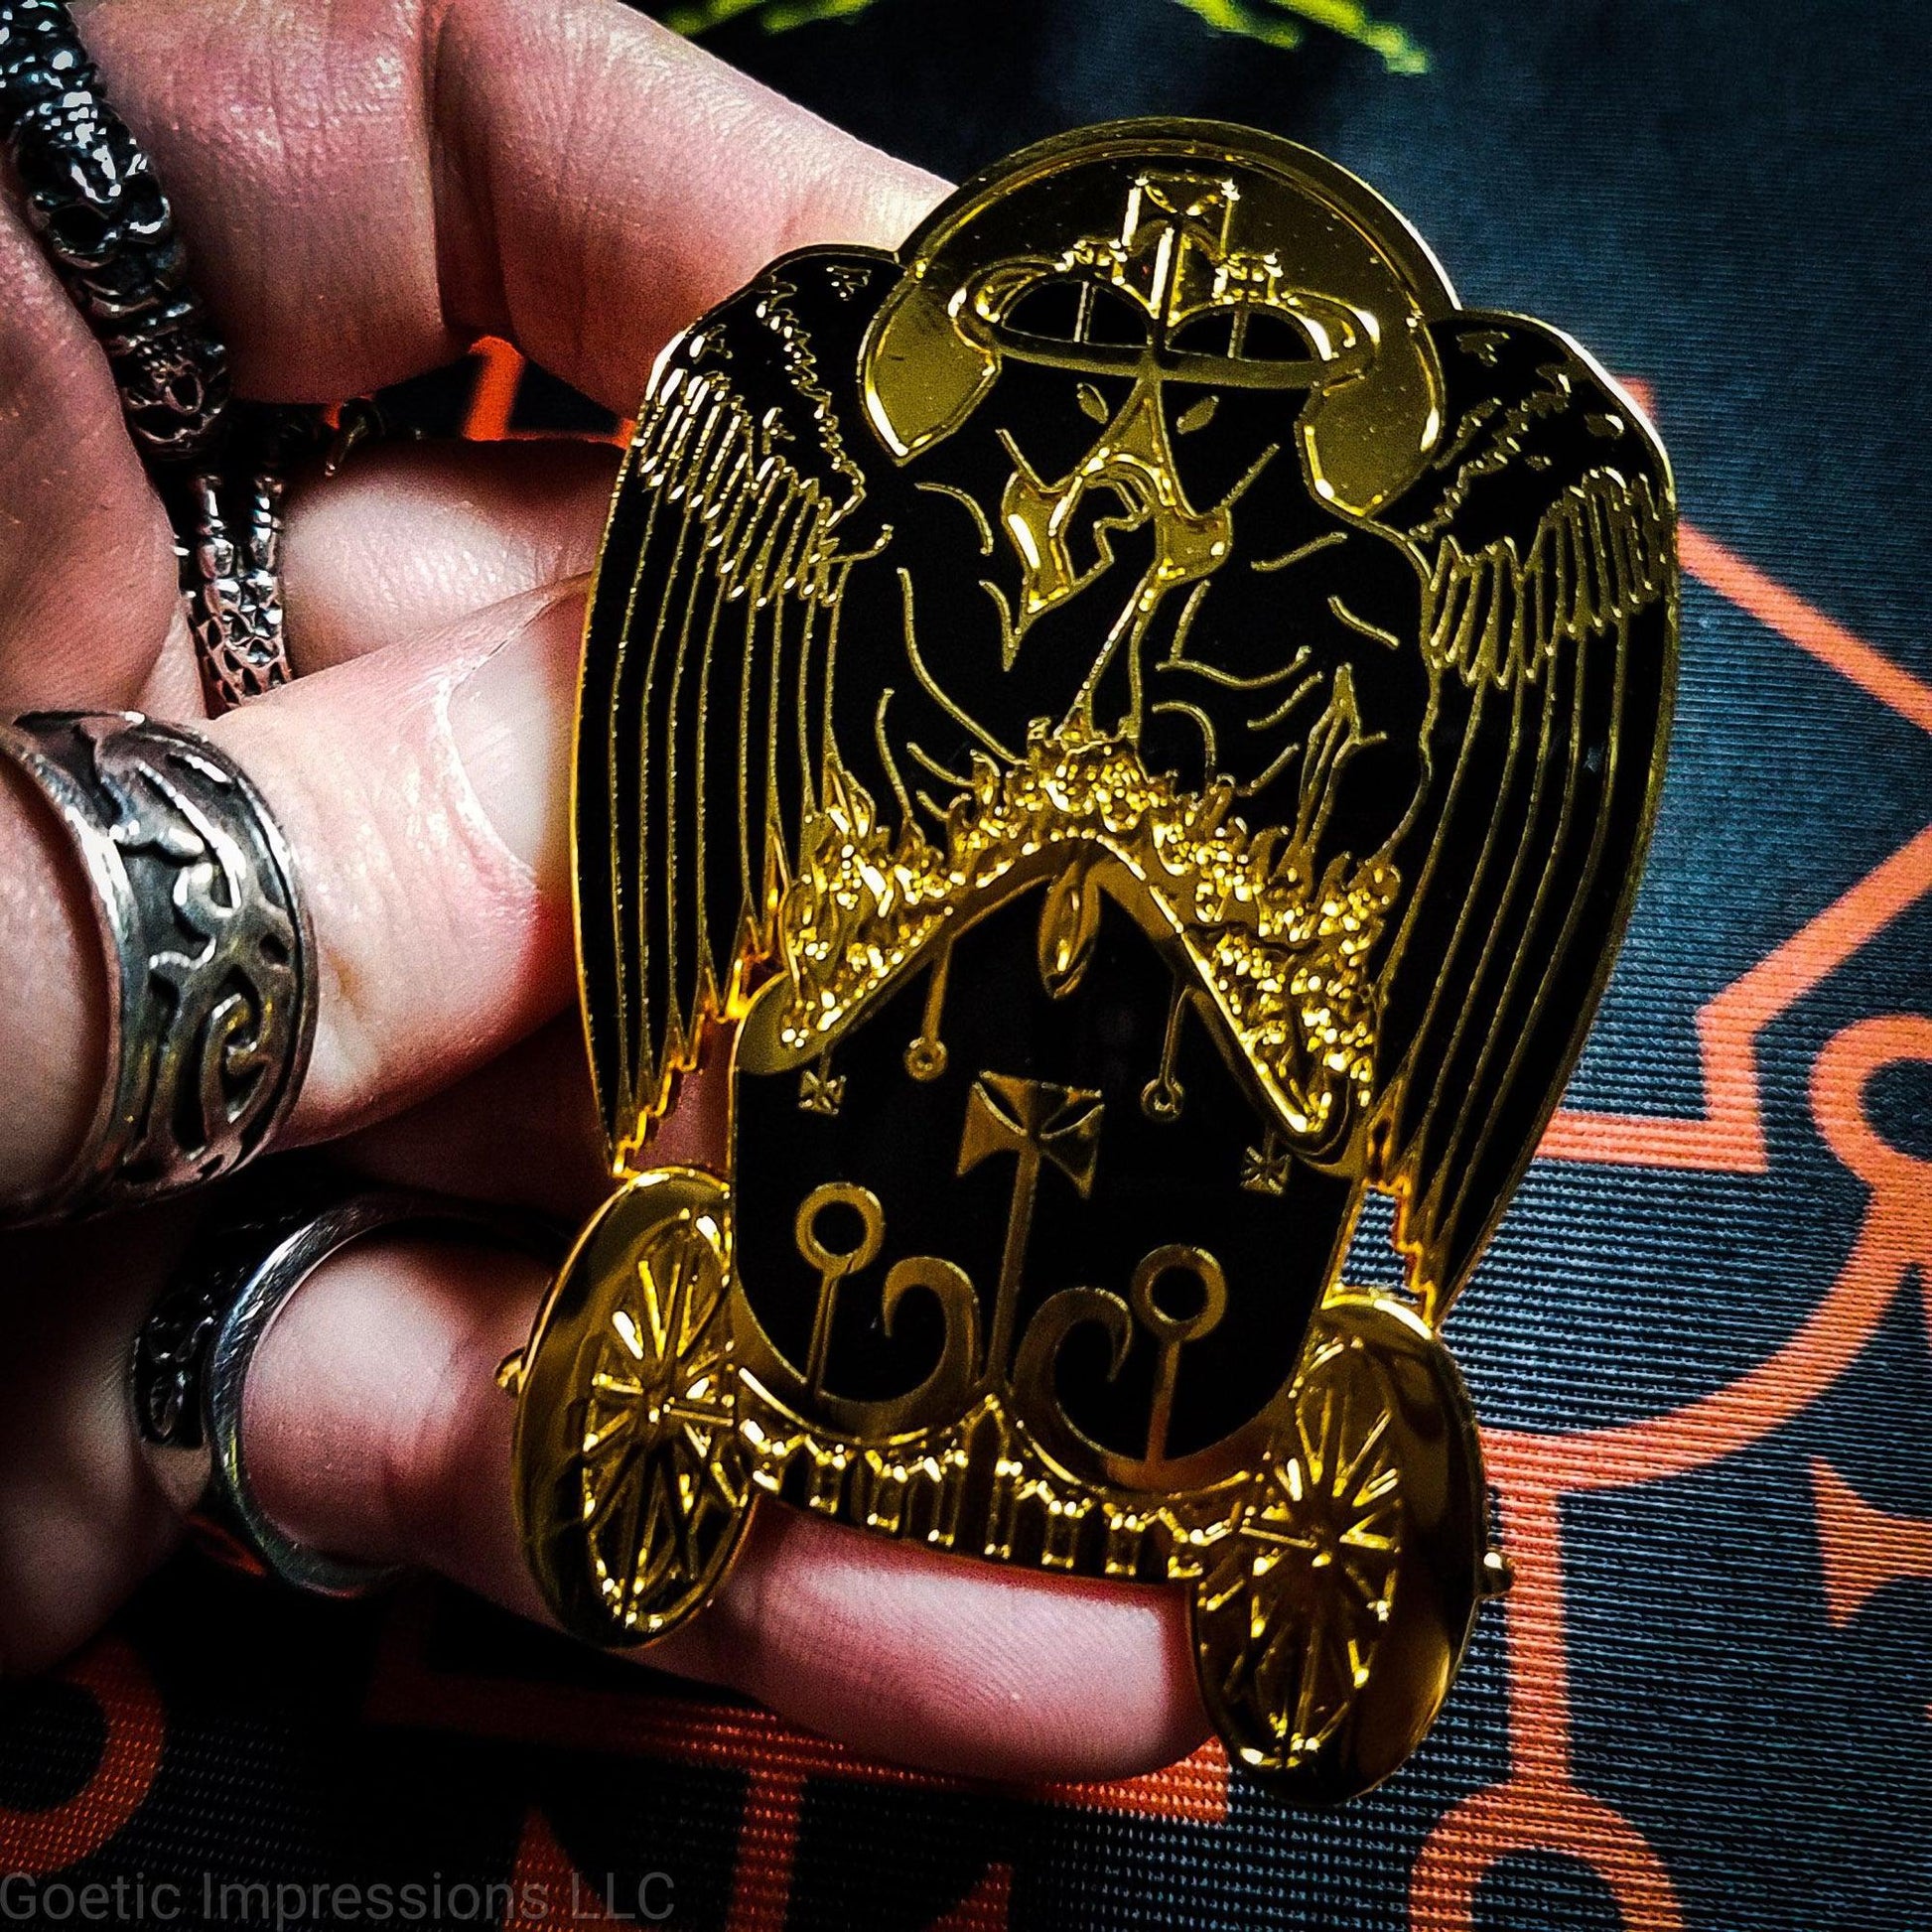 A hand is holding a black and gold hard enamel pin featuring the demon Belial. Belial is shown as two angels facing each other with arms interlocked.  They are standing in a flaming chariot. 